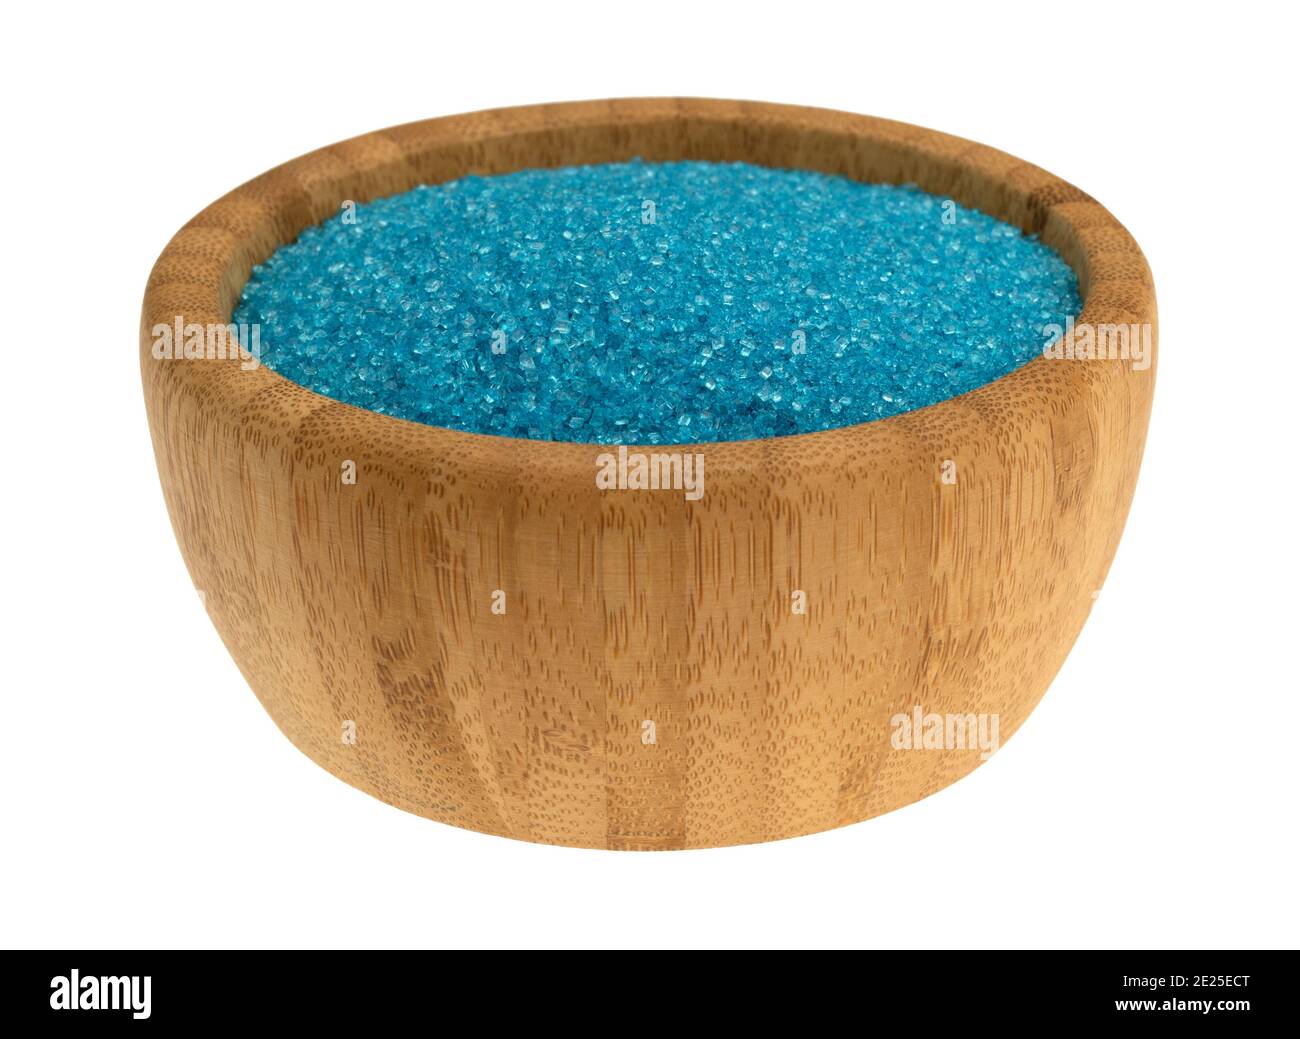 Portion of blue sanding sugar in a small wood bowl isolated on a white background. Stock Photo